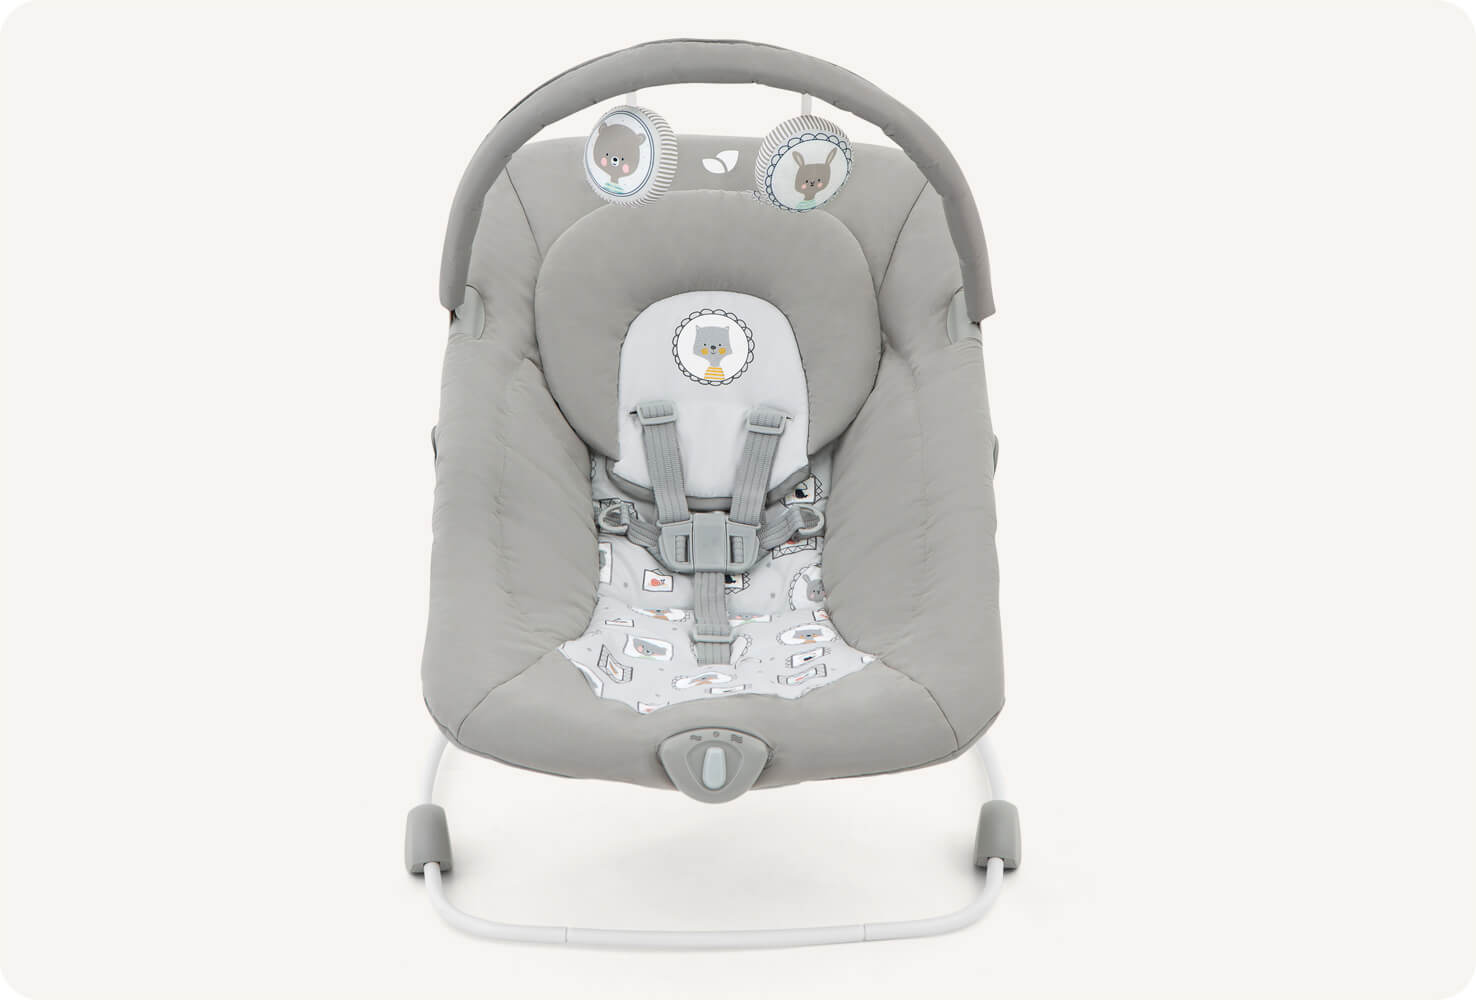   Frontal view of Joie light gray wish bouncer.